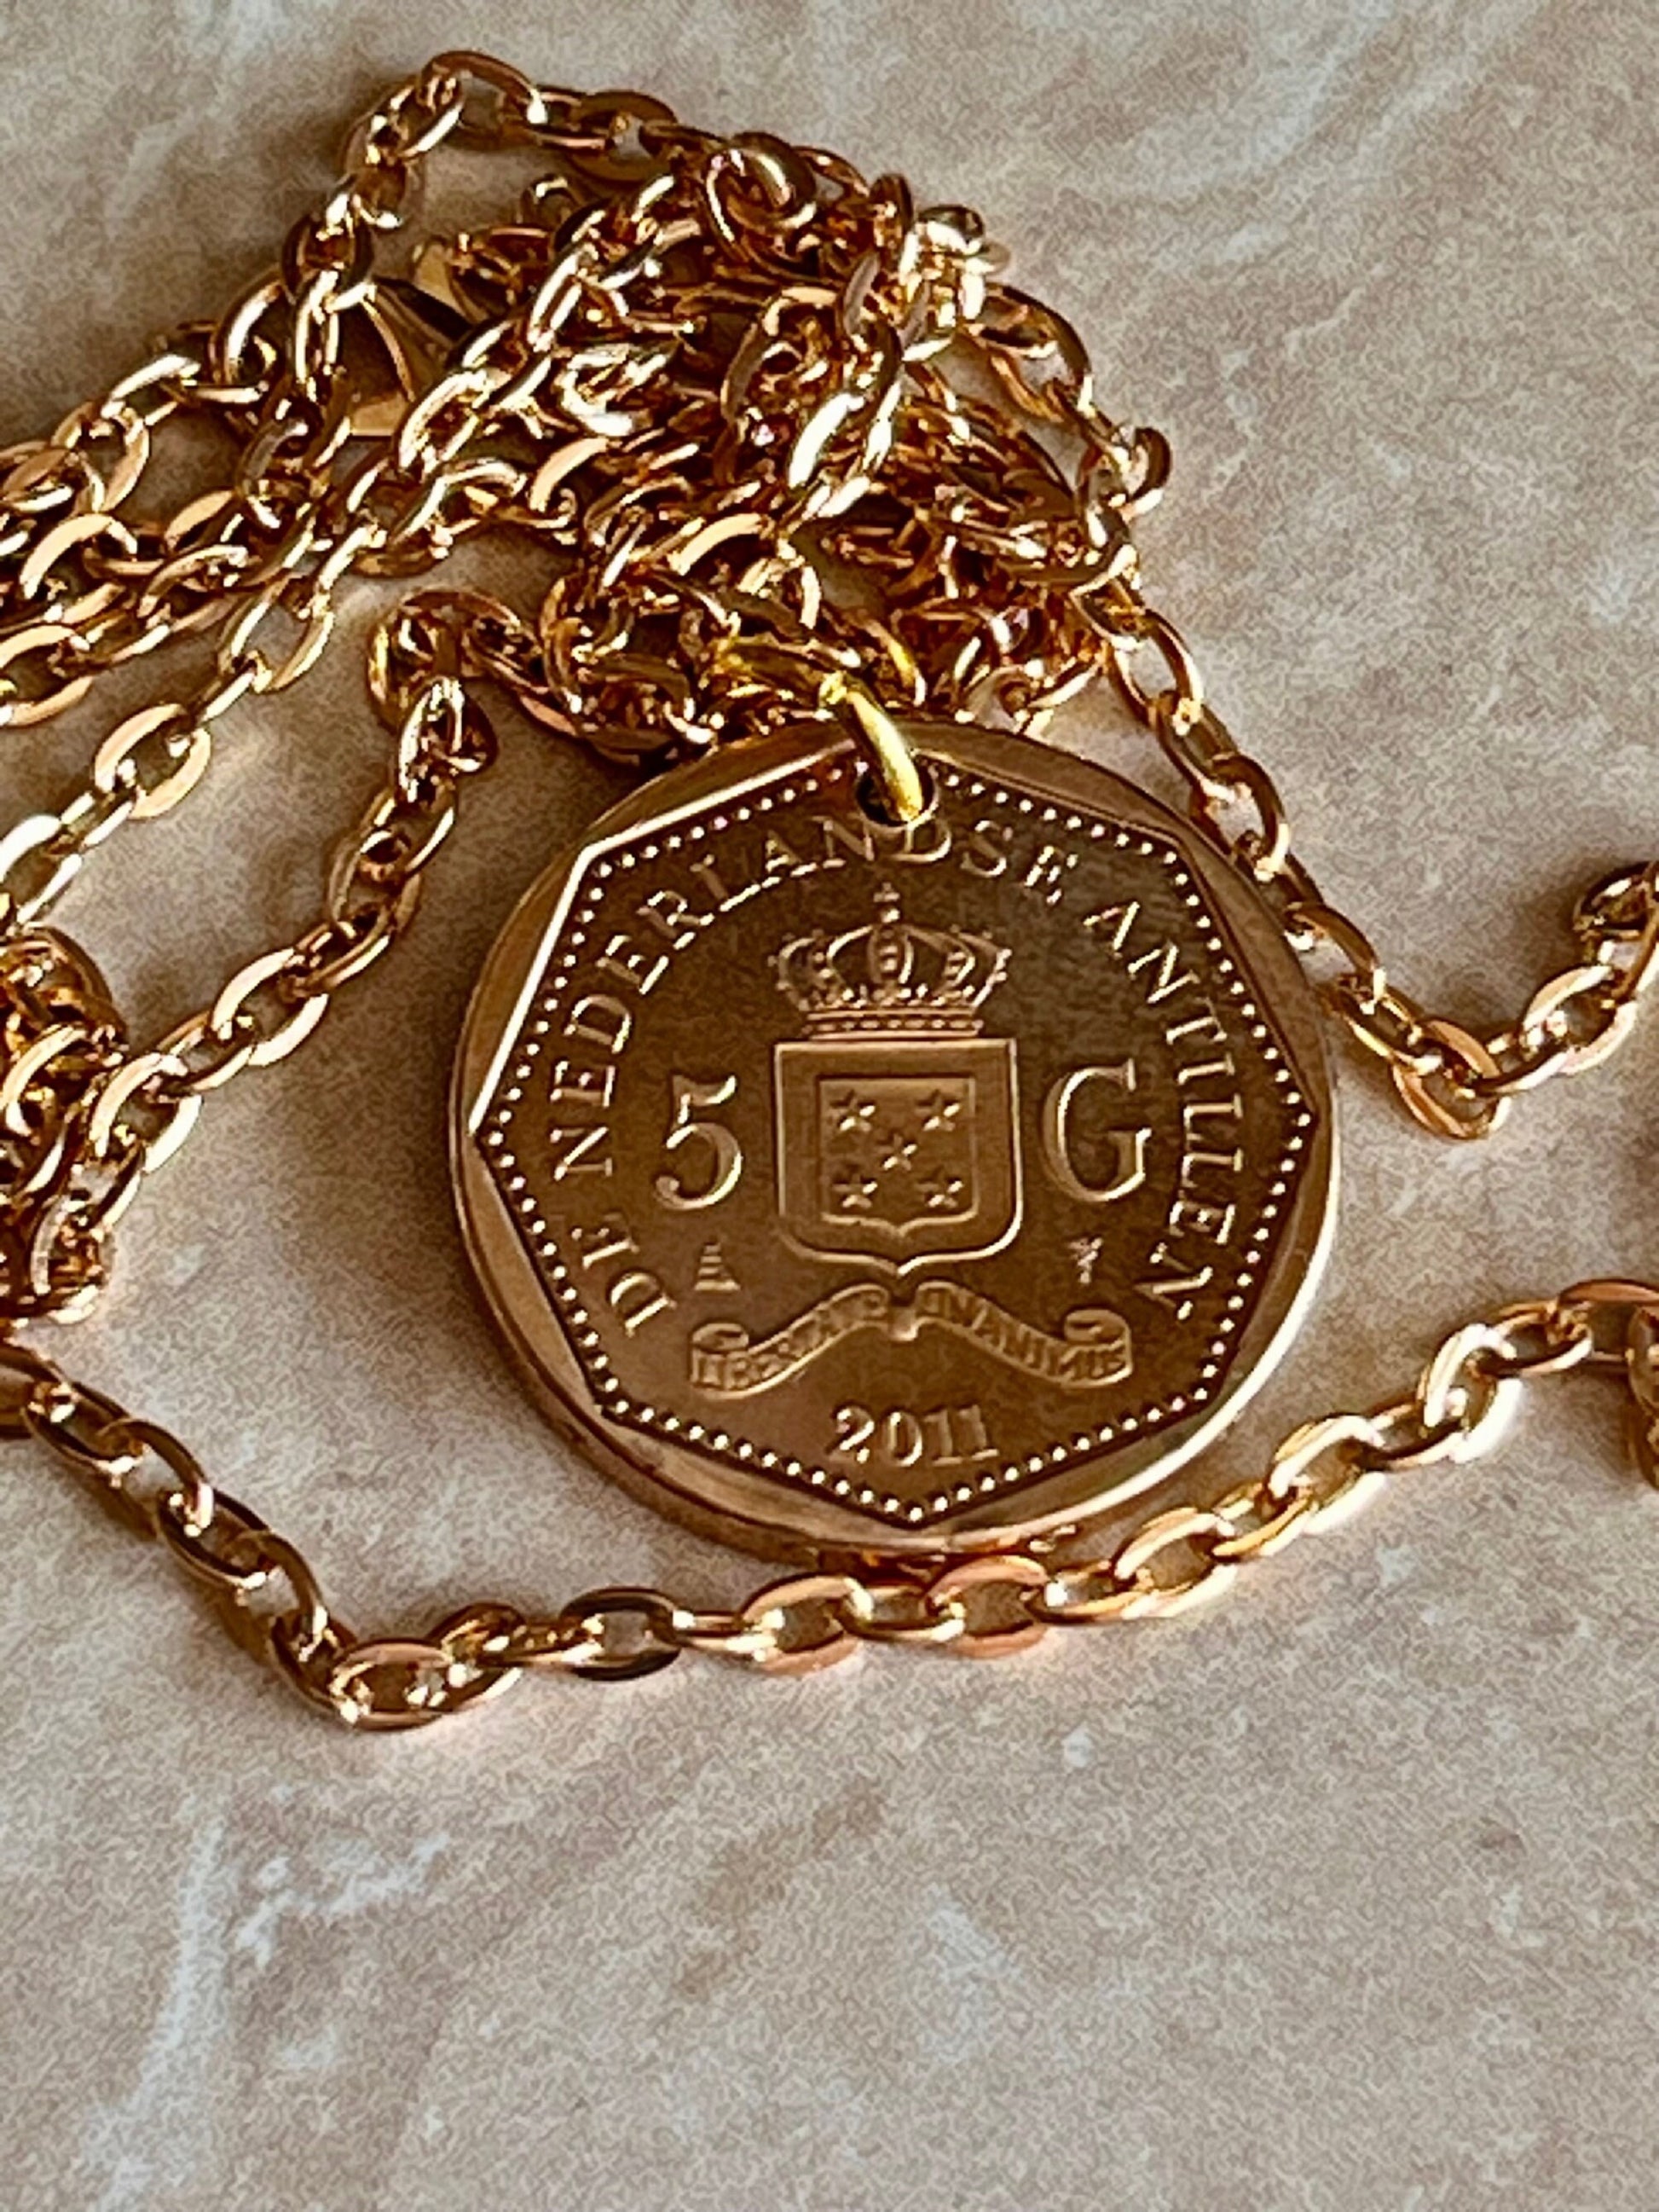 Netherland Coin Pendant Antilles 5 Gulden Queen Juliana Necklace Jewelry Gift For Friend Coin Charm Gift For Him, Her, World Coins Collector